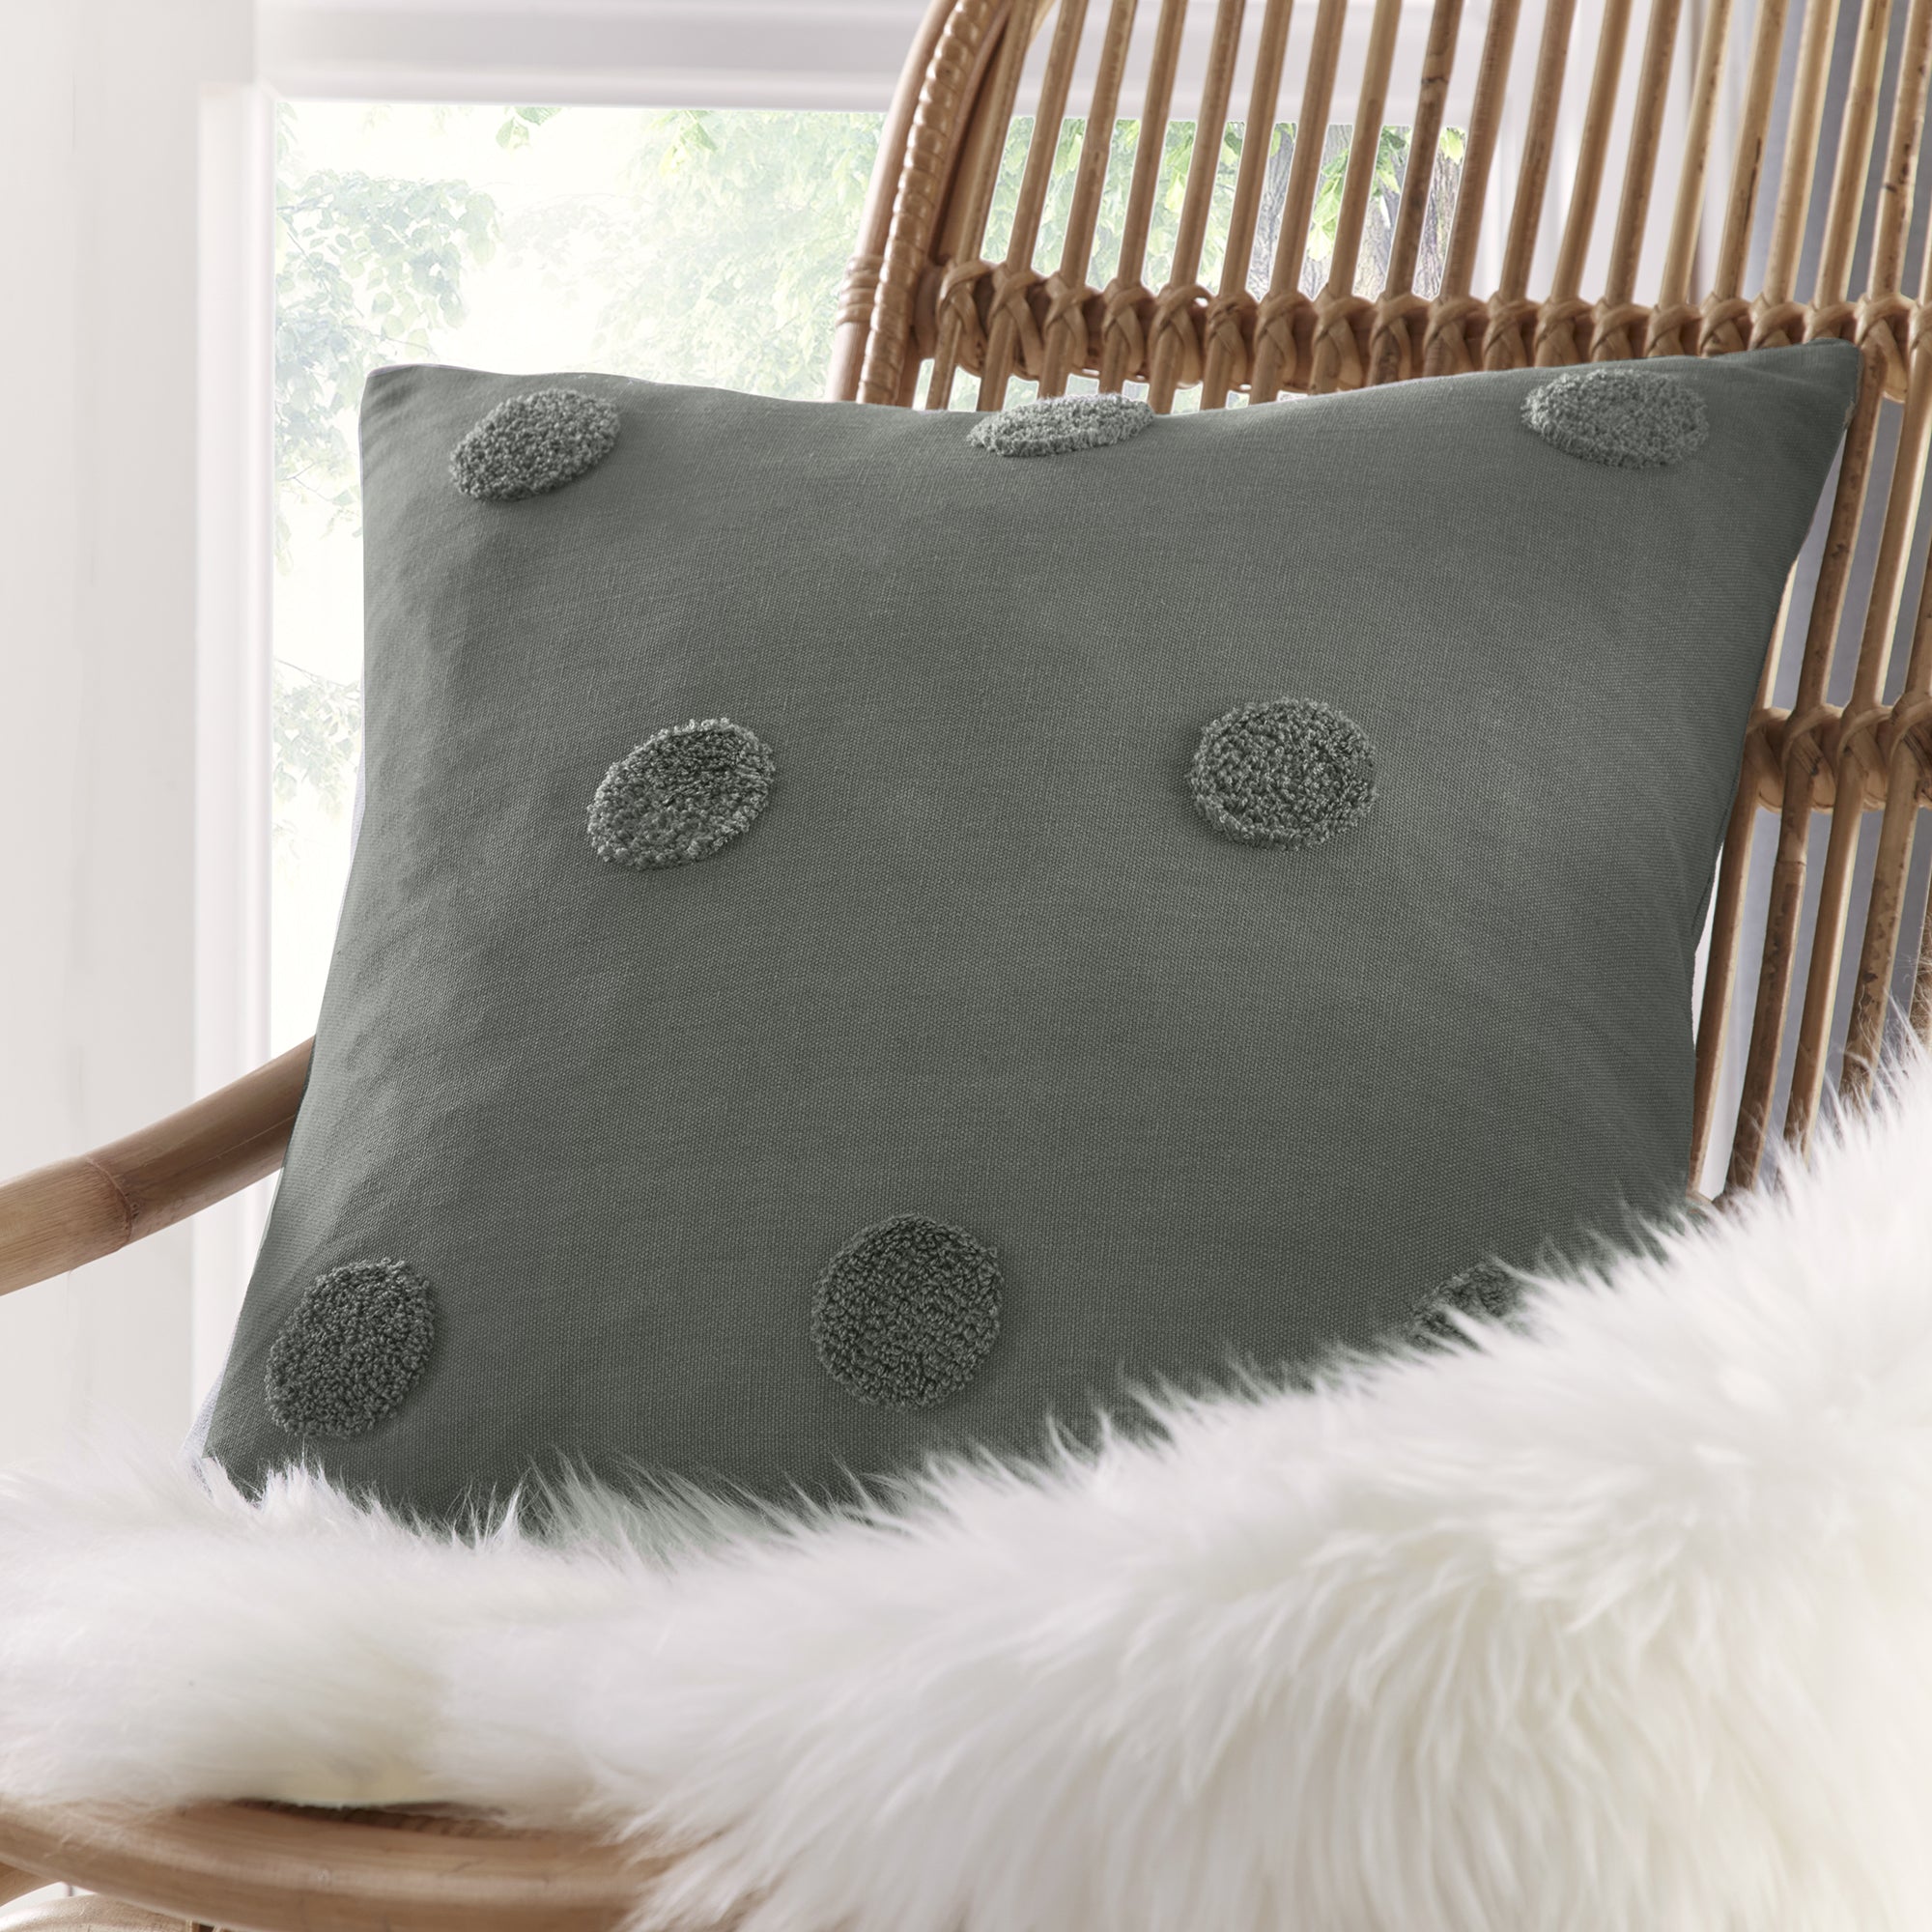 Zara - Tufted Spots Filled Cushion - by Appletree Boutique